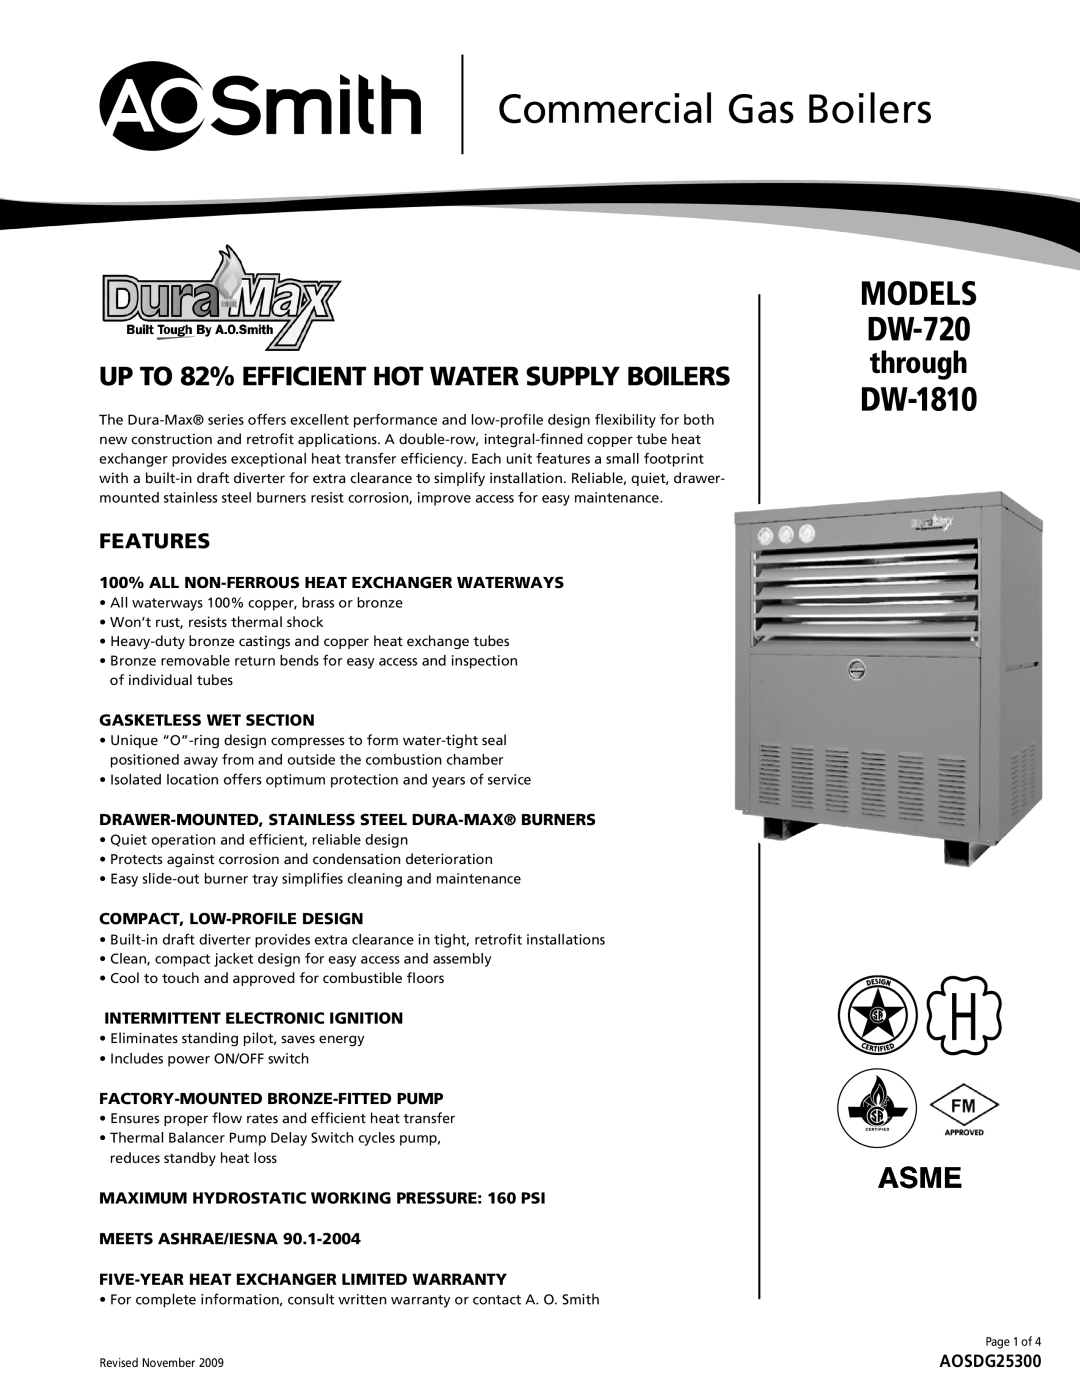 A.O. Smith DW-1810 warranty Commercial Gas Boilers, 100% ALL NON-FERROUS HEAT EXCHANGER WATERWAYS, Gasketless Wet Section 